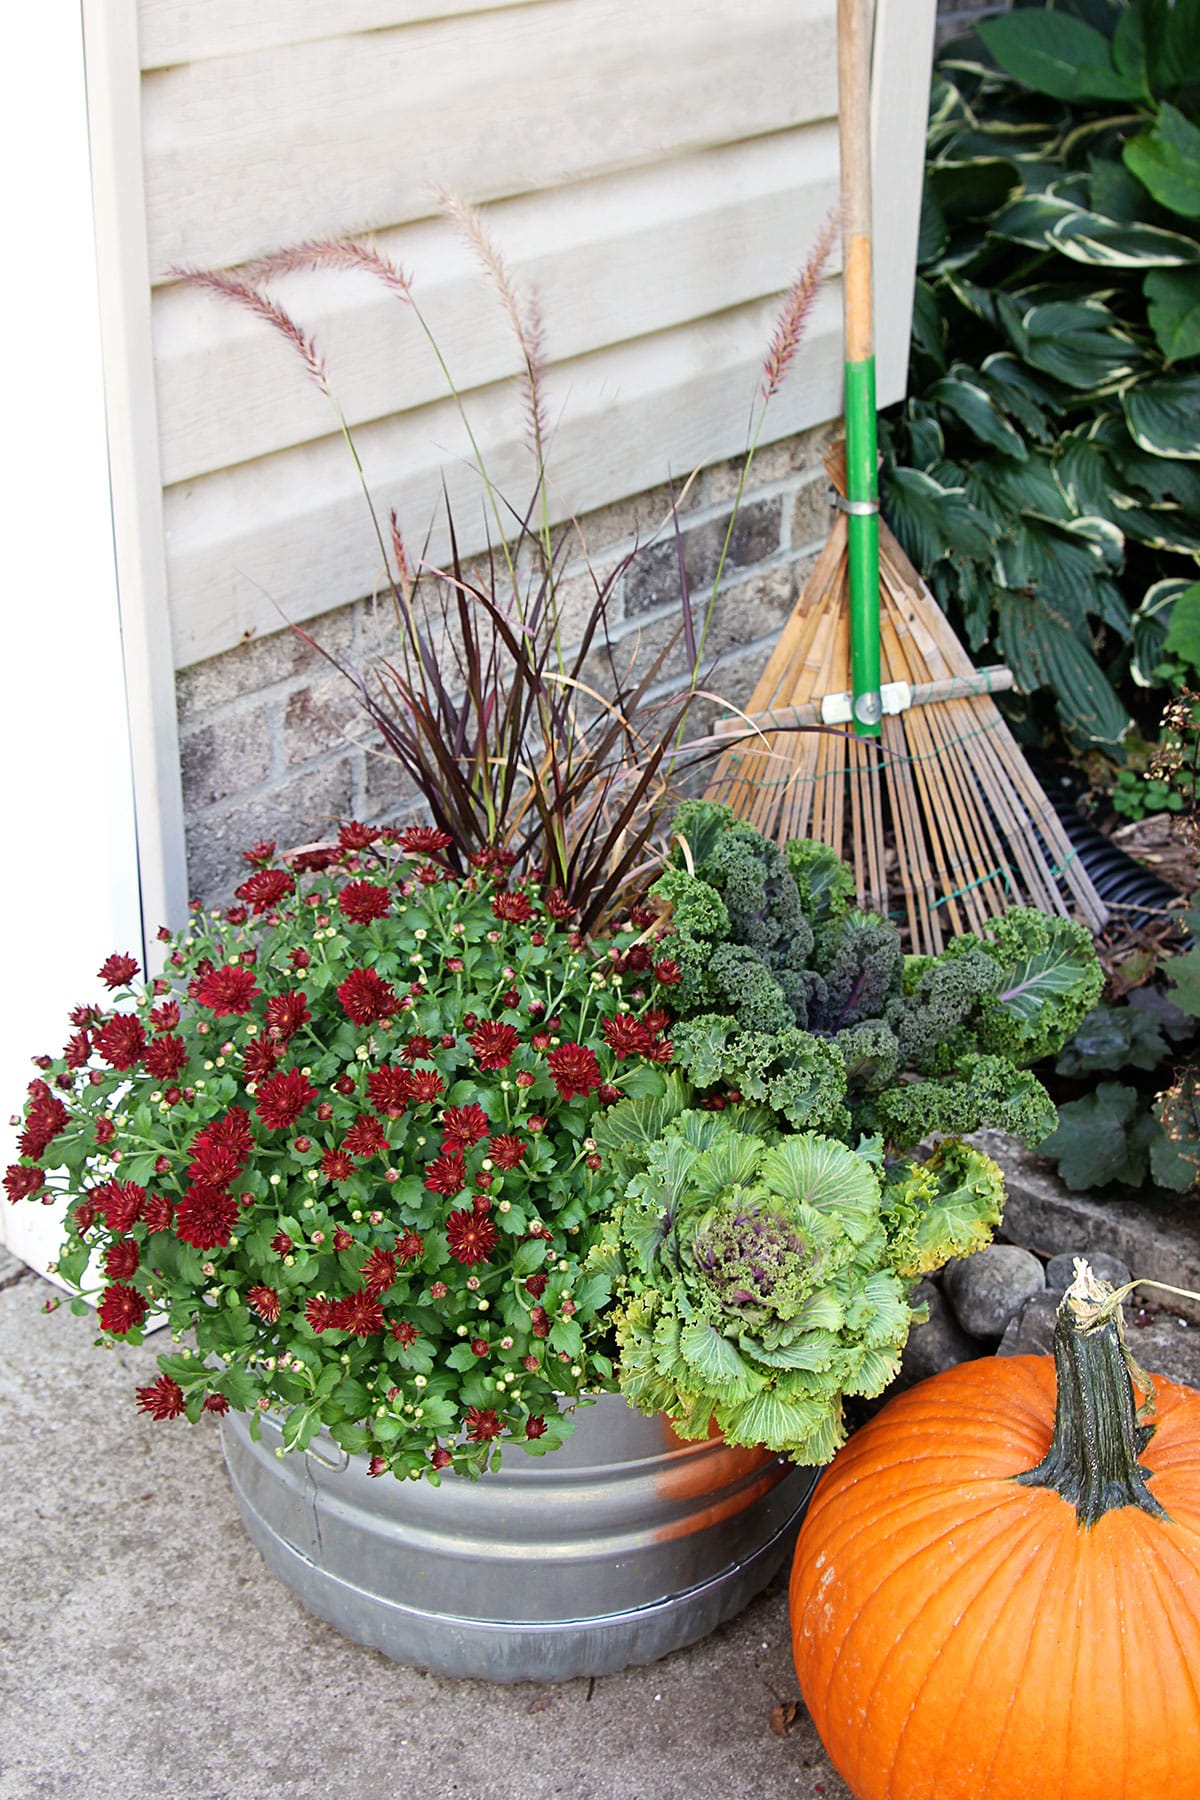 Fall plants in a galvanized tub with a vintage garden rake and an orange pumpkin.